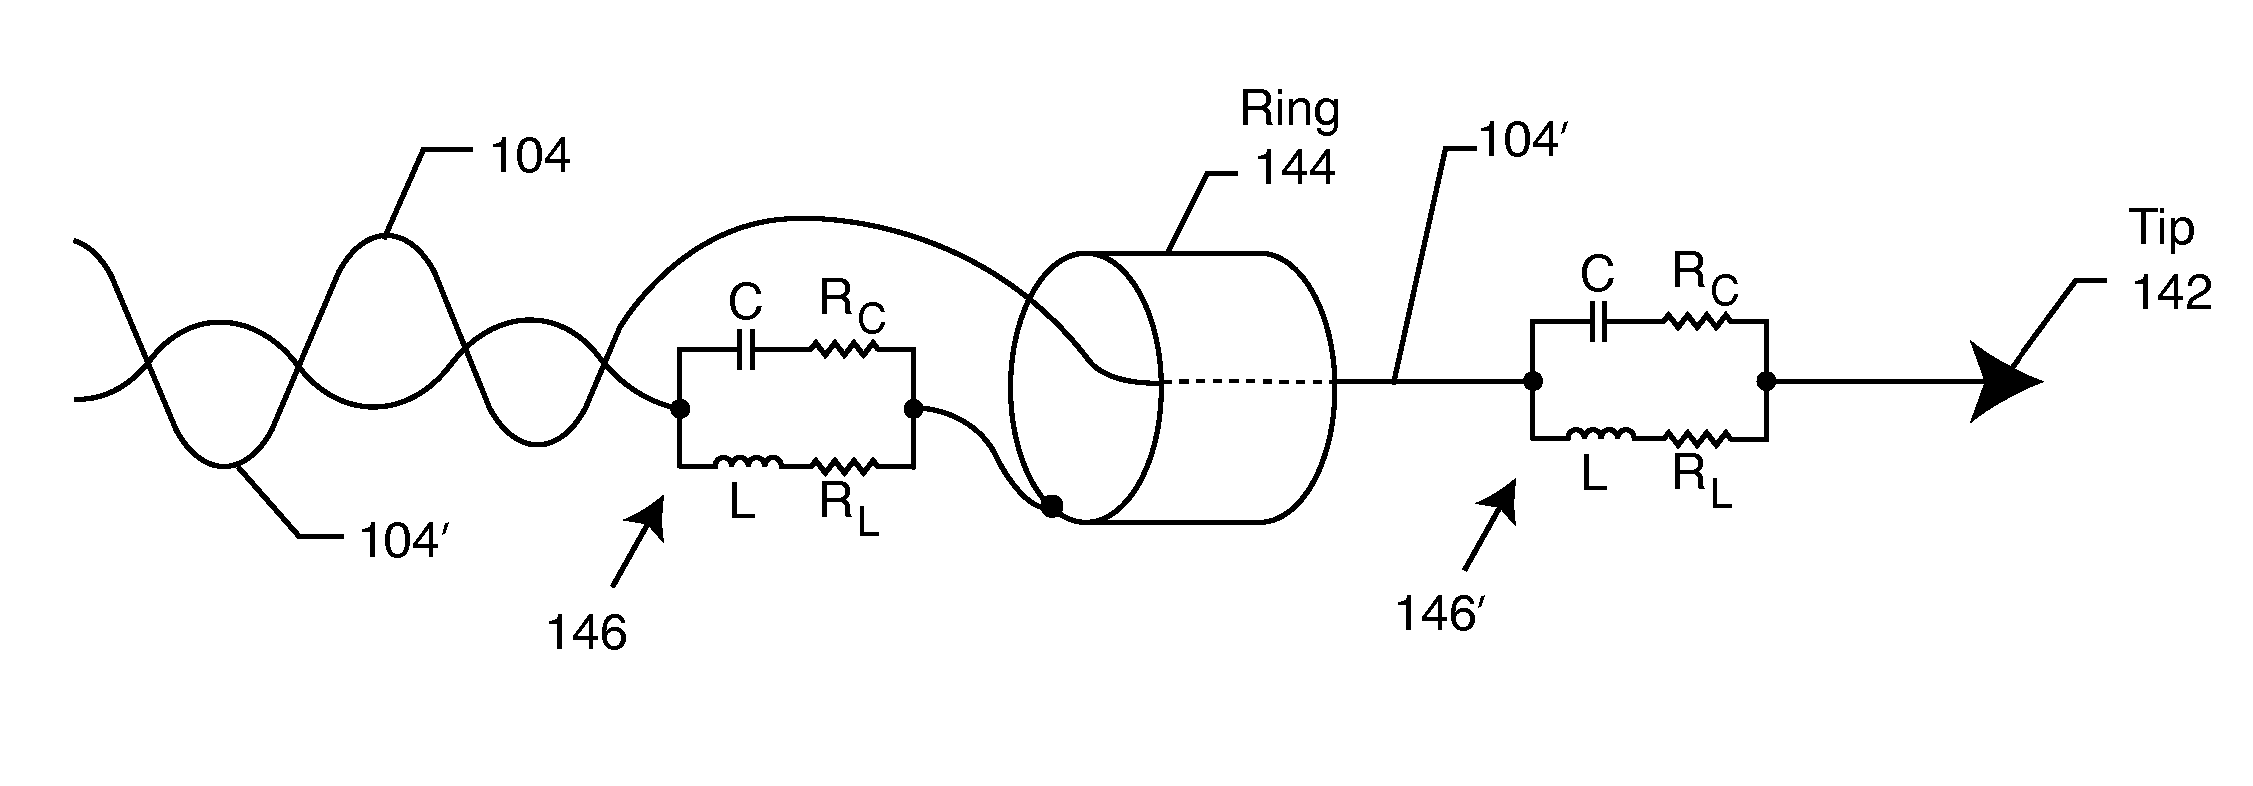 Band stop filter employing a capacitor and an inductor tank circuit to enhance MRI compatibility of active medical devices